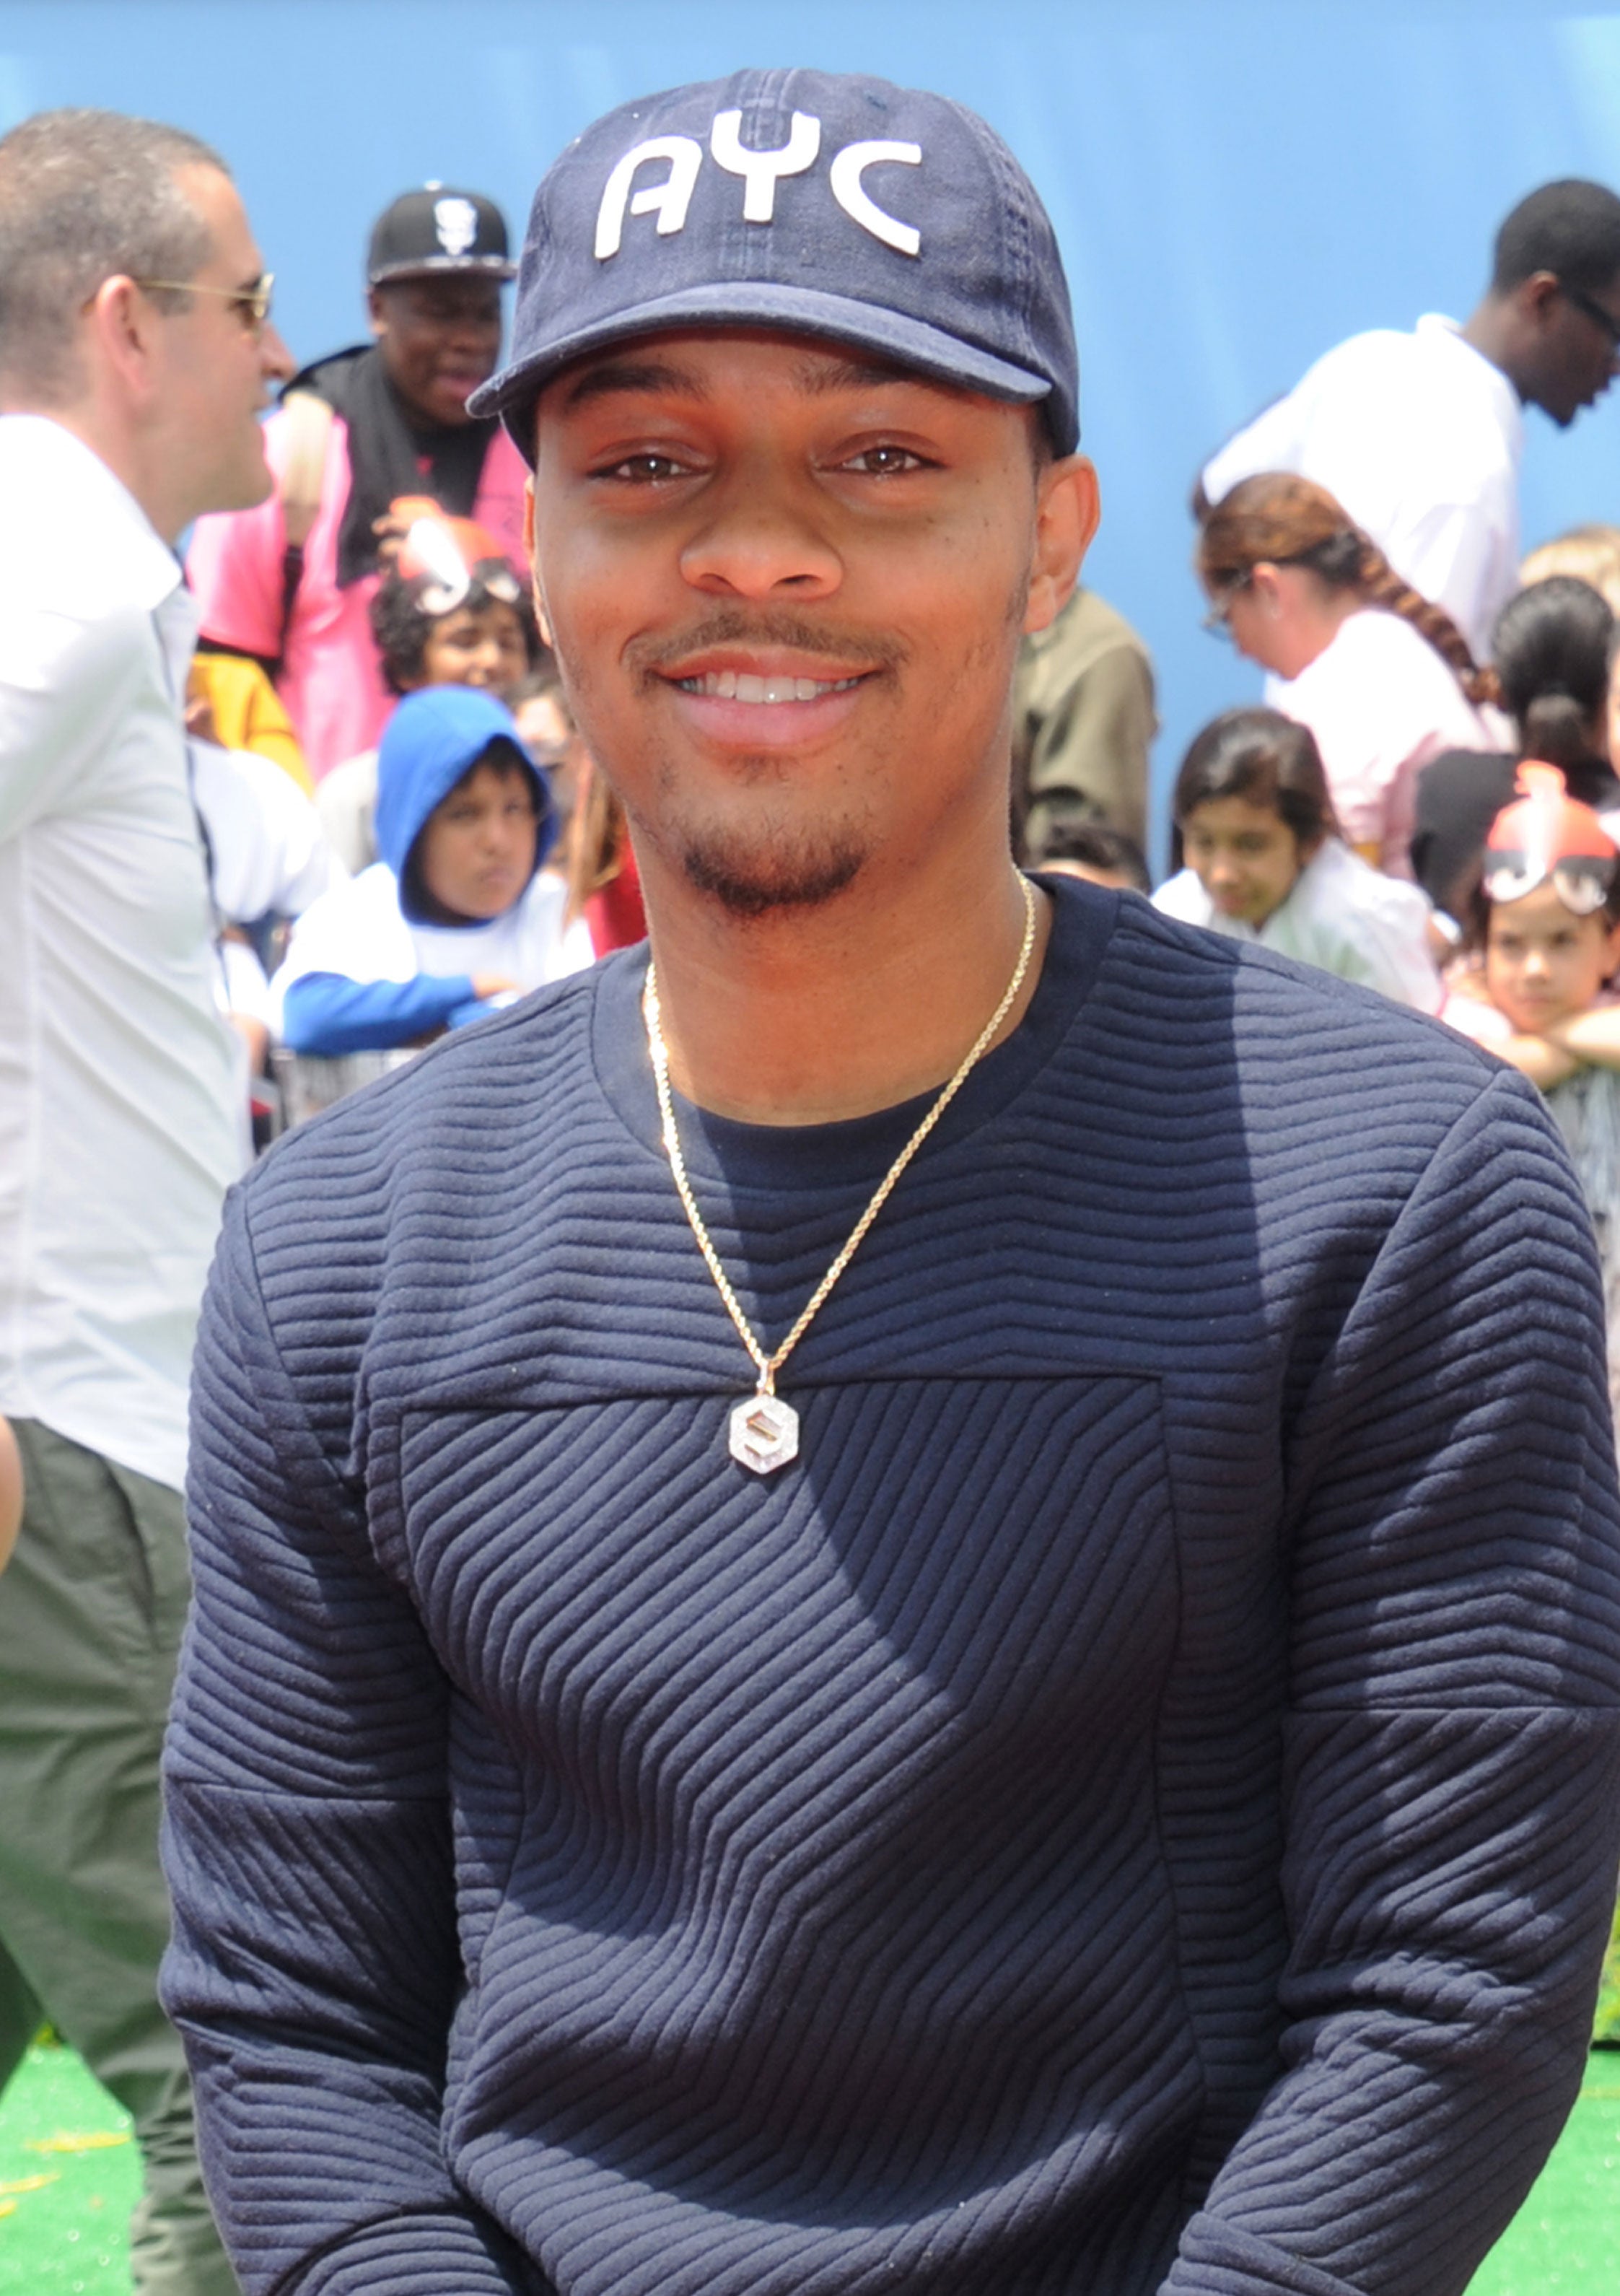 We Grew Up Bow Wow, How About You? | Essence